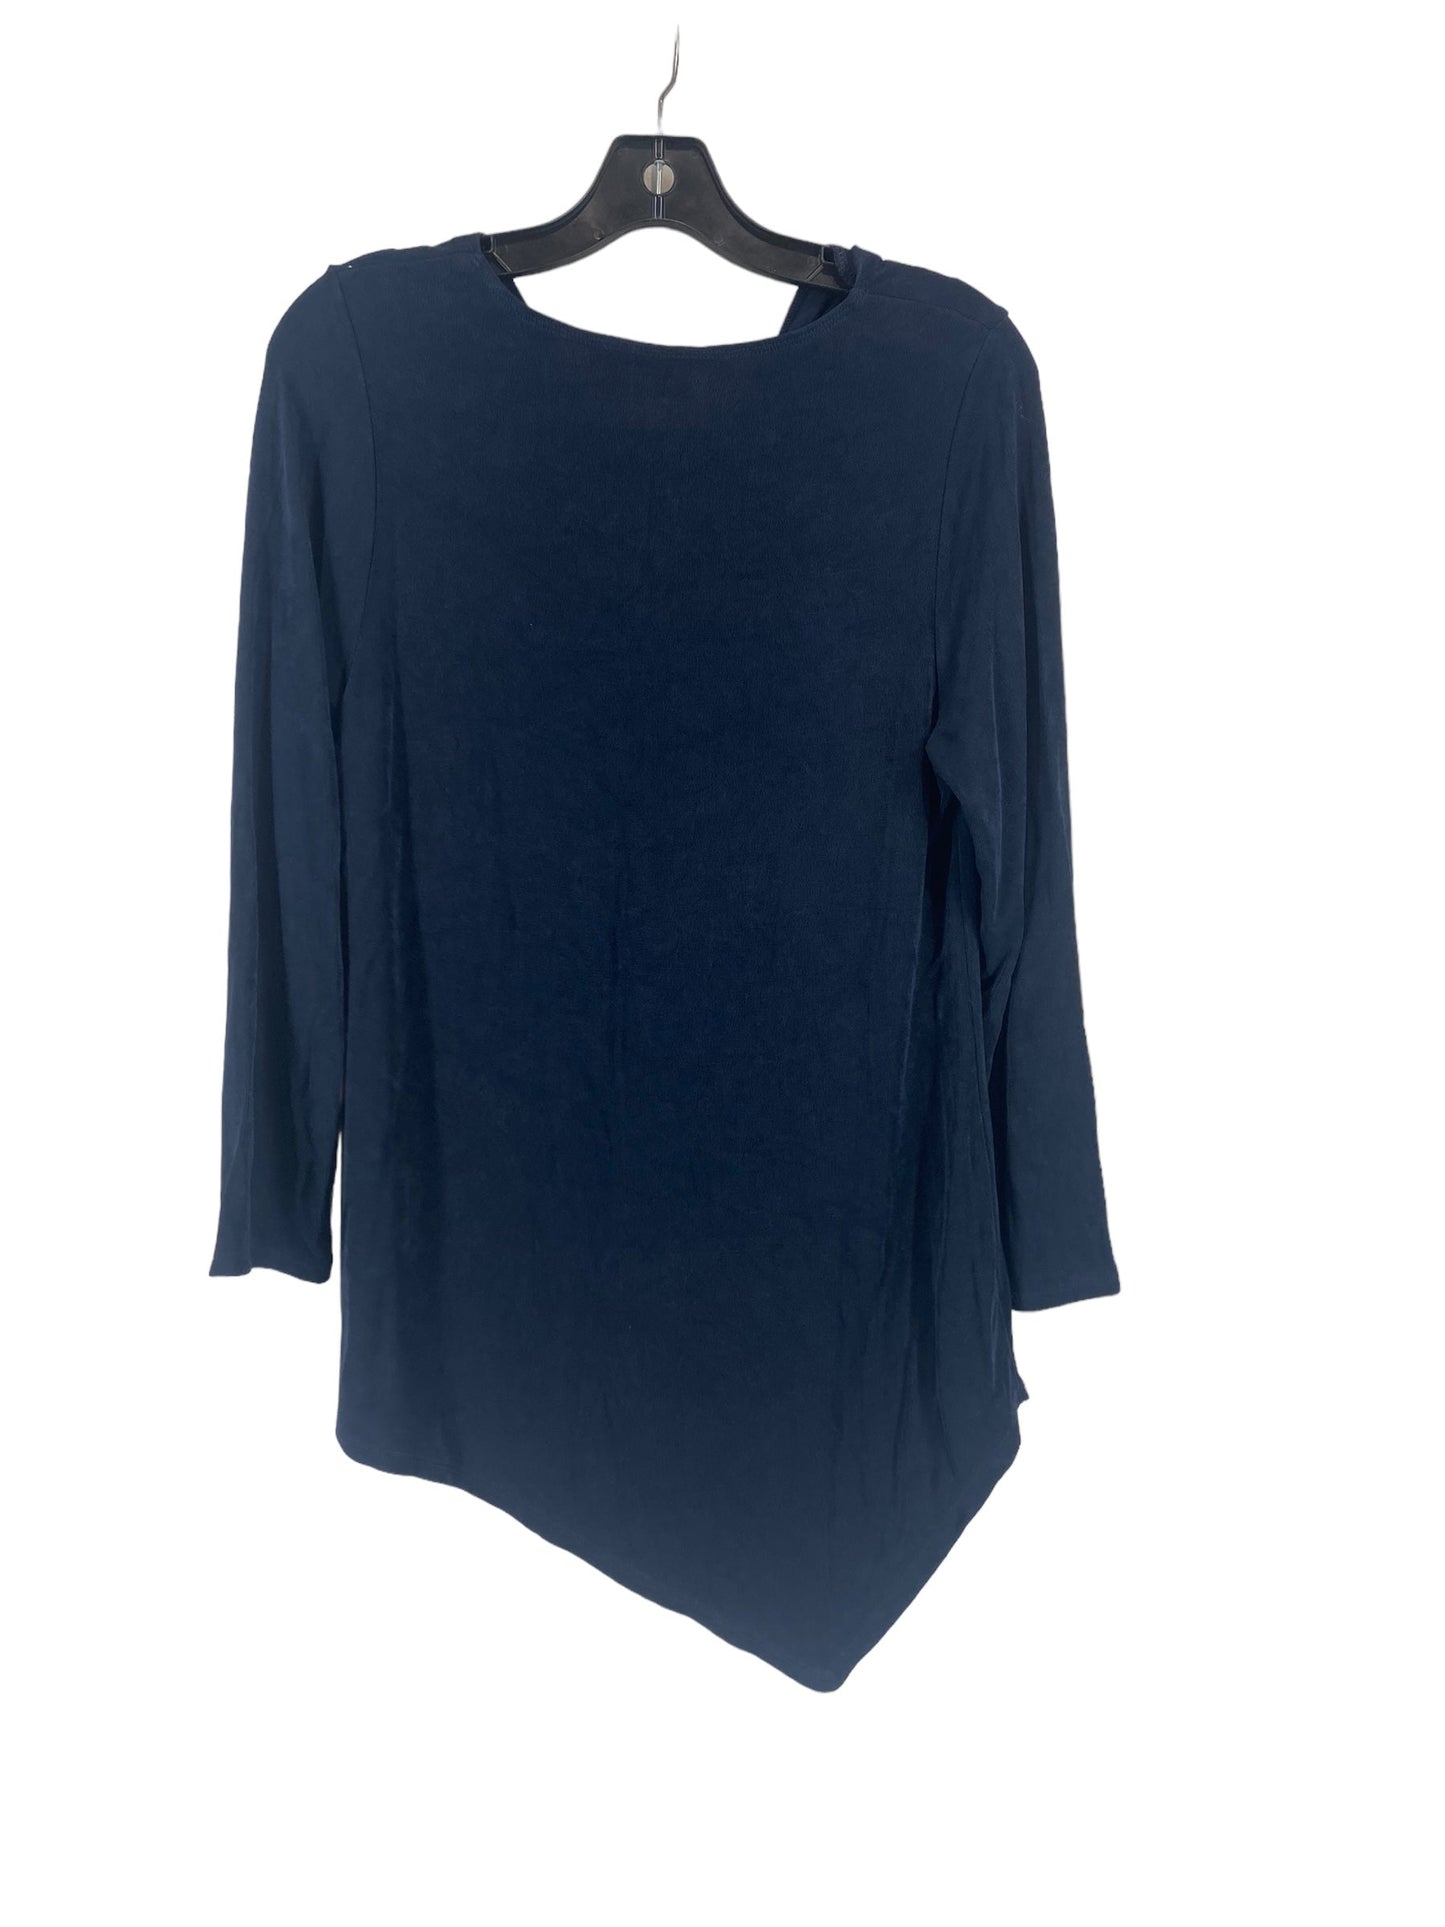 Black Top 3/4 Sleeve Chicos, Size 0